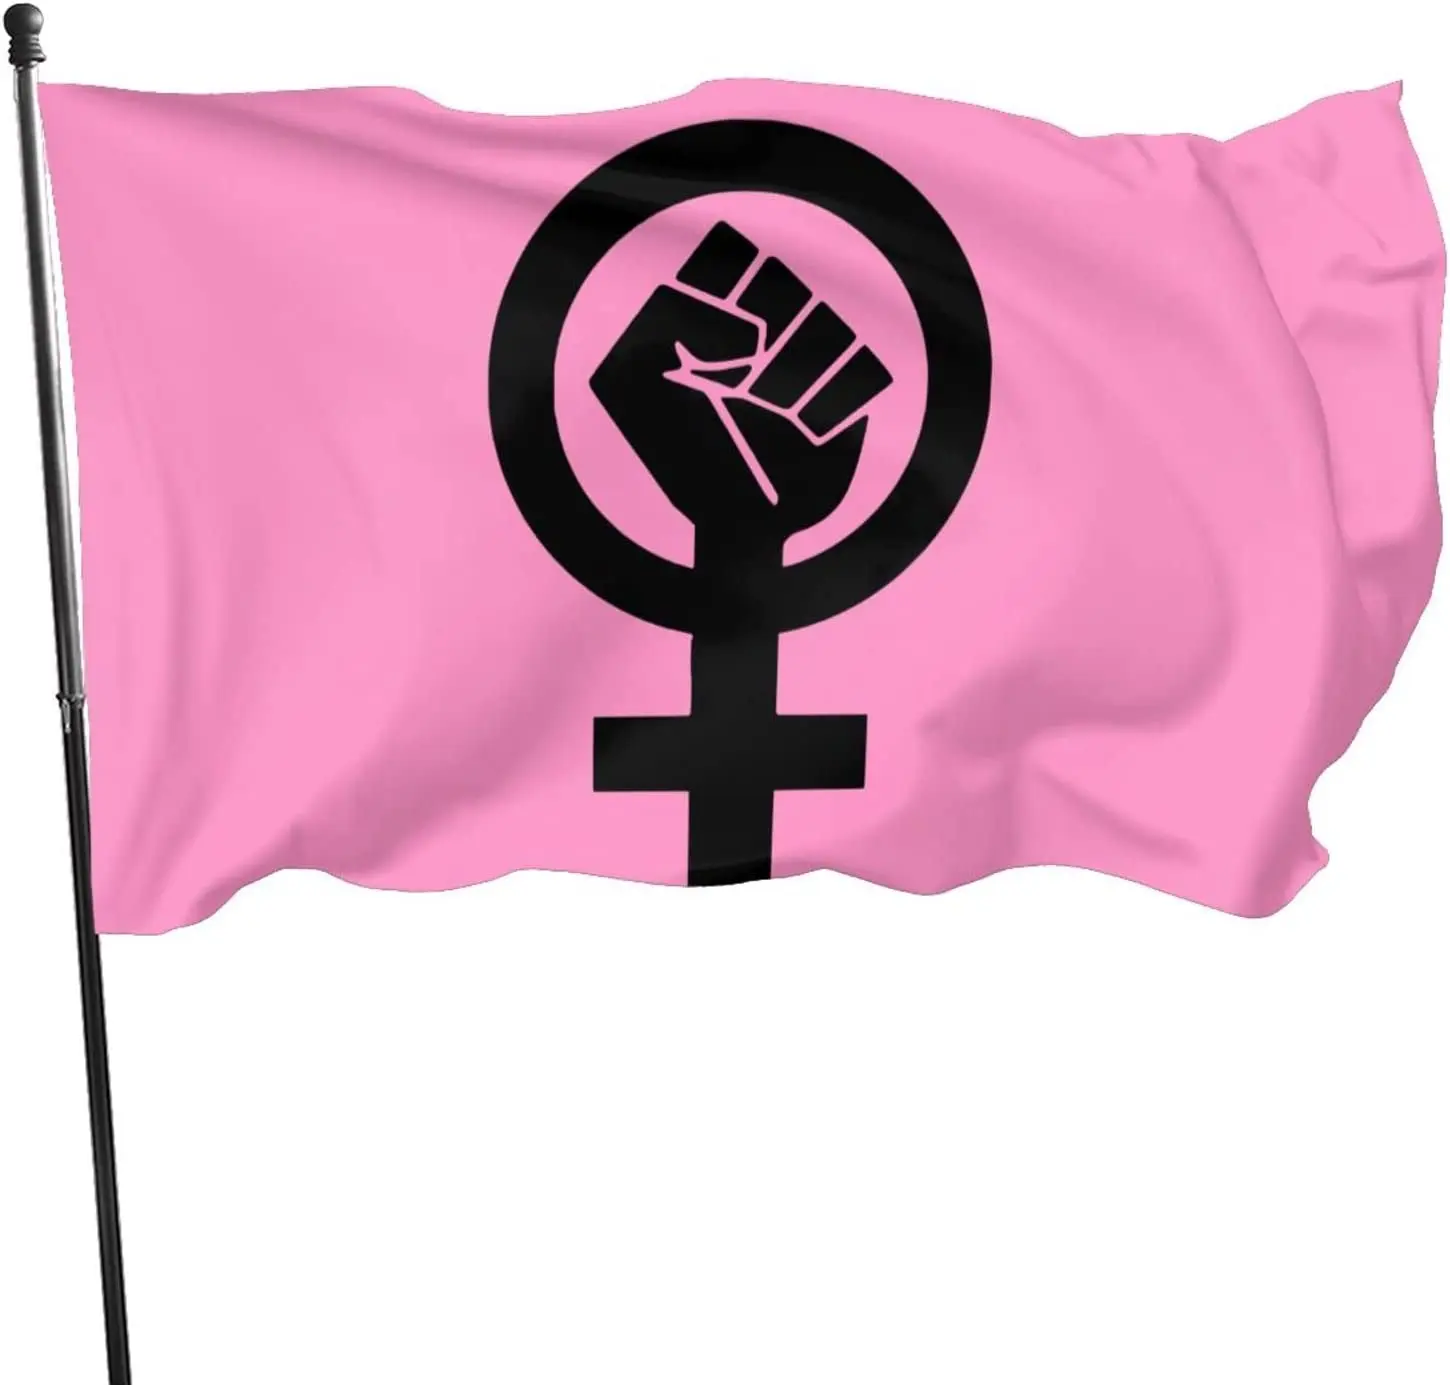 

Women's Rights Are Human Rights Protest Flag Female Symbol 3x5 Ft Garden Yard Flags Outdoor Party Home Decorations